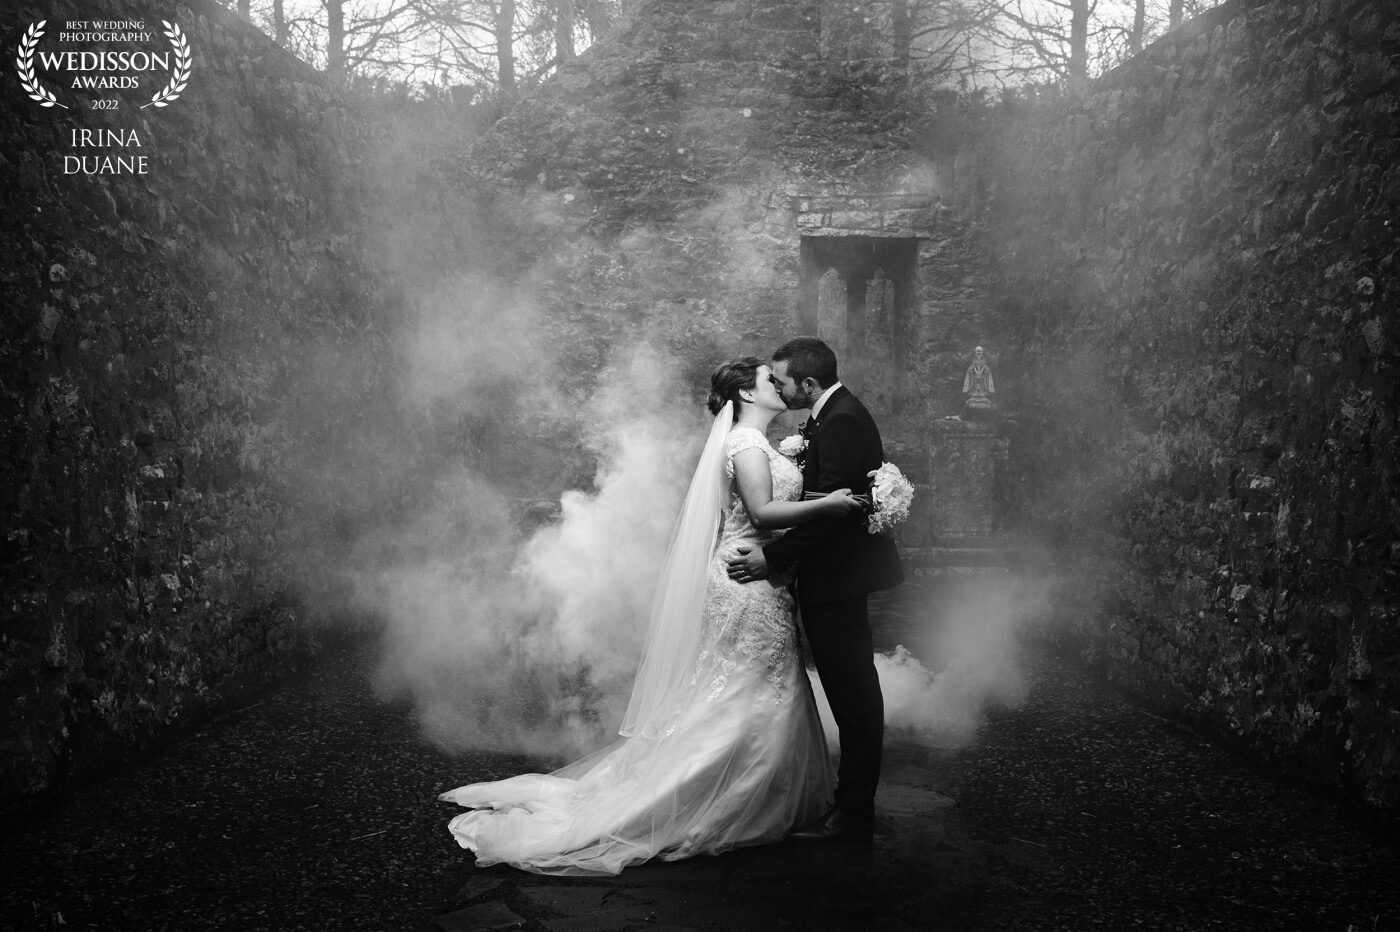 This photograph was taken at St. Patrick's Well in Clonmel, Ireland. We used one godox flash to illuminate the smoke bomb behind the couple and one camera right with MagGrid to control the light spill.